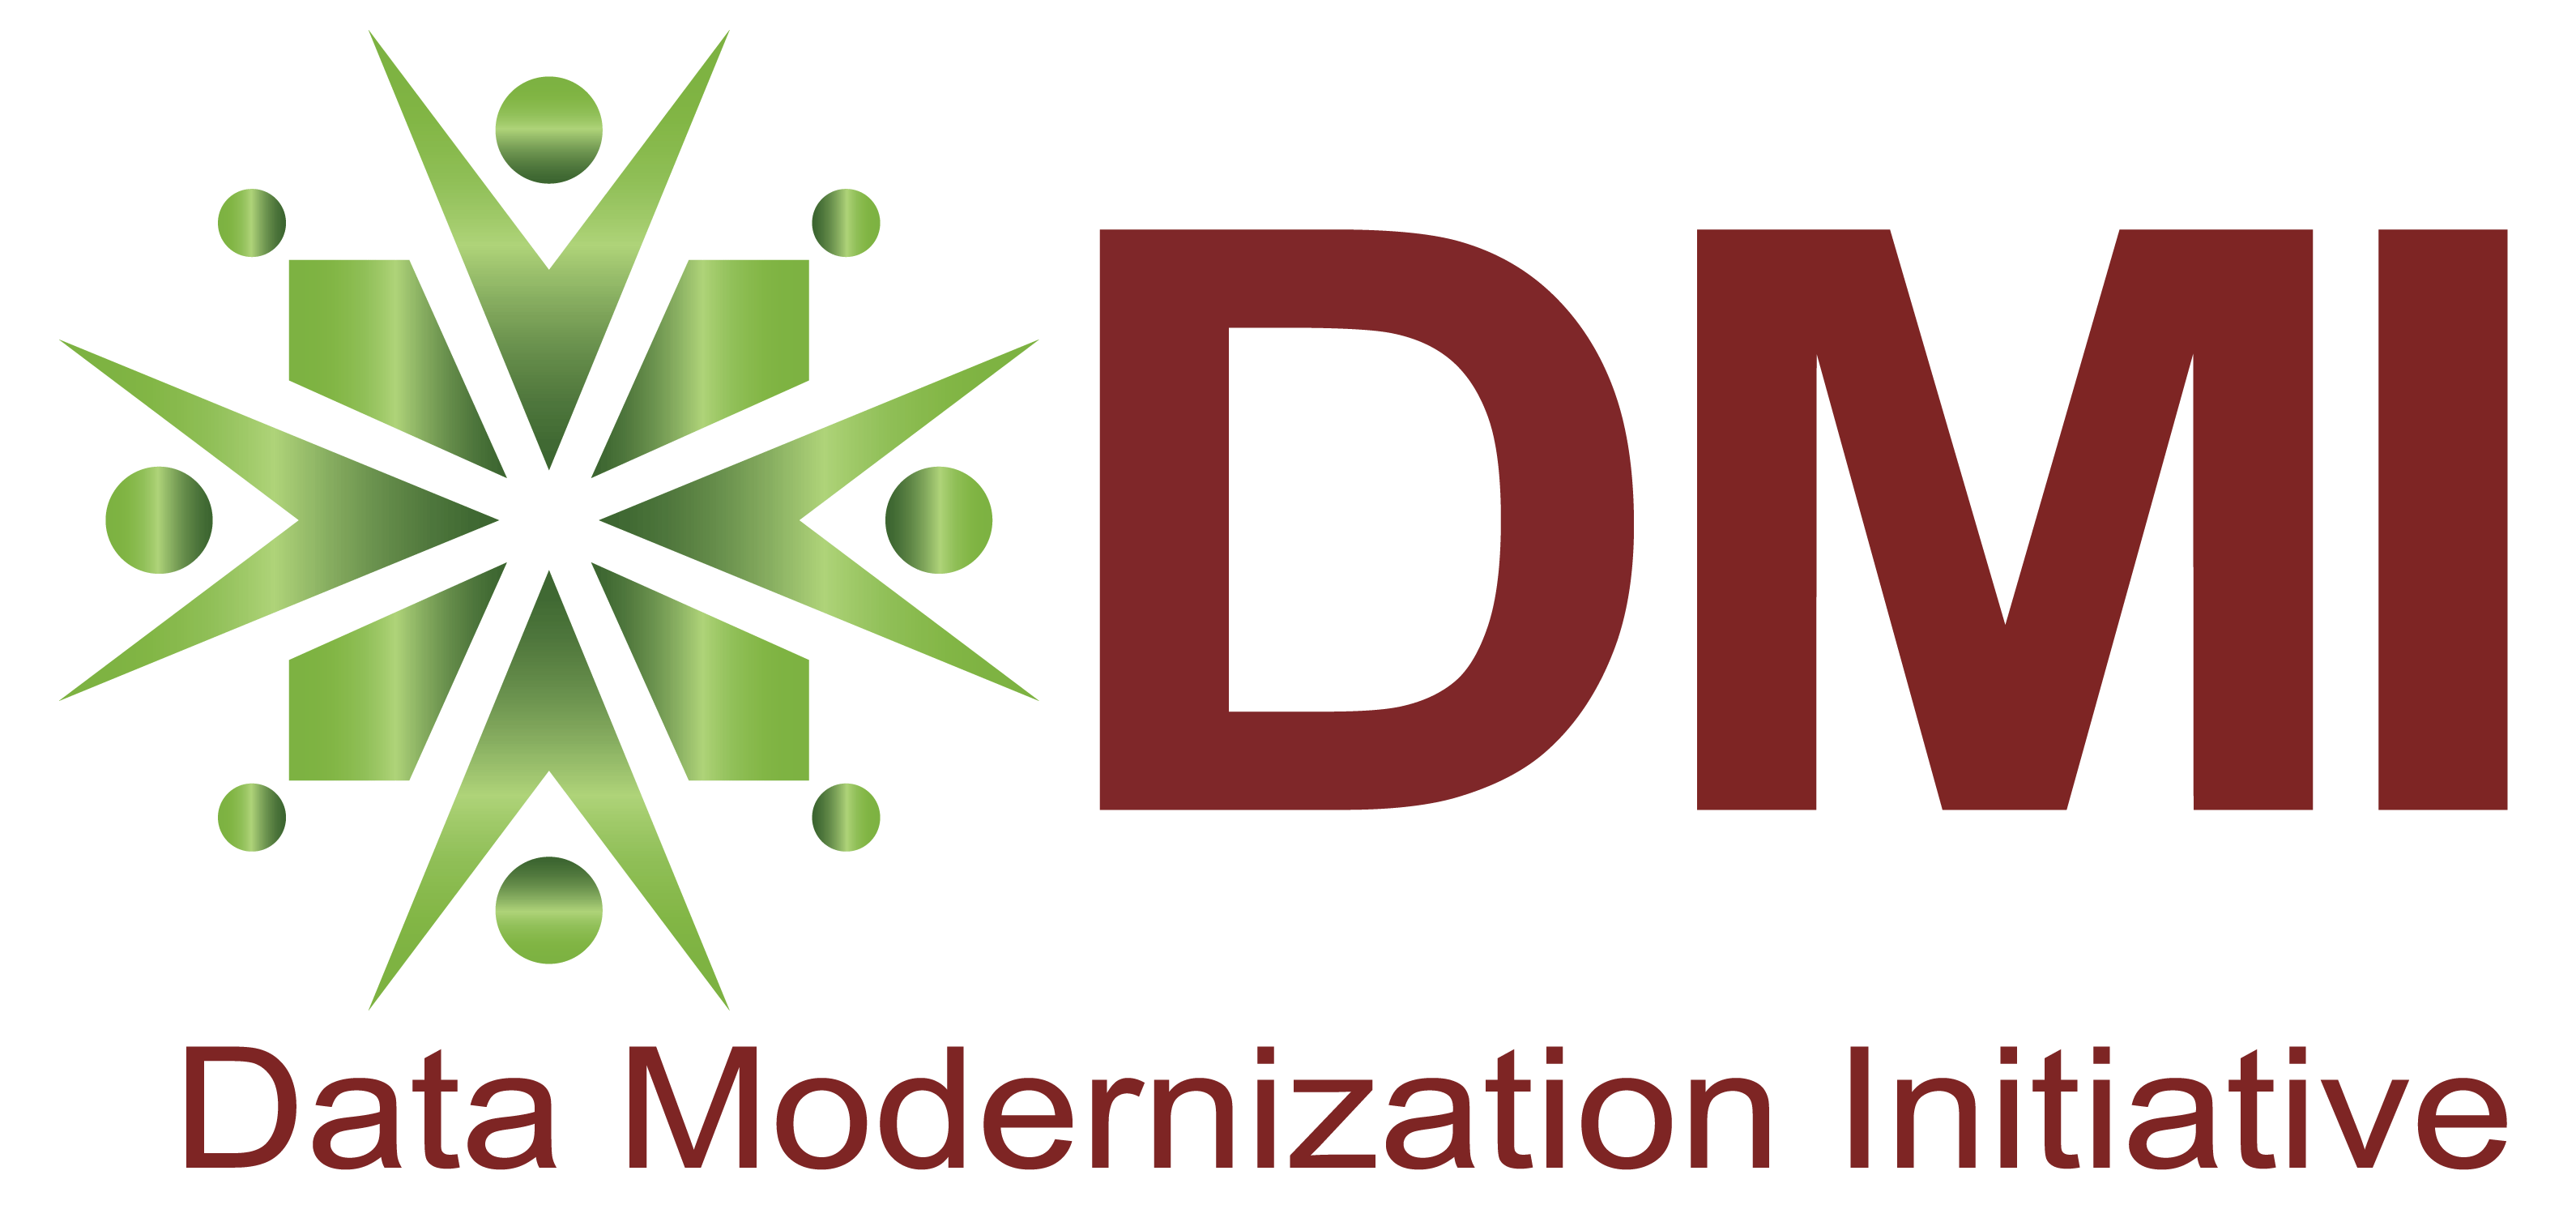 Data Modernization Initiative: Some Barriers and Challenges